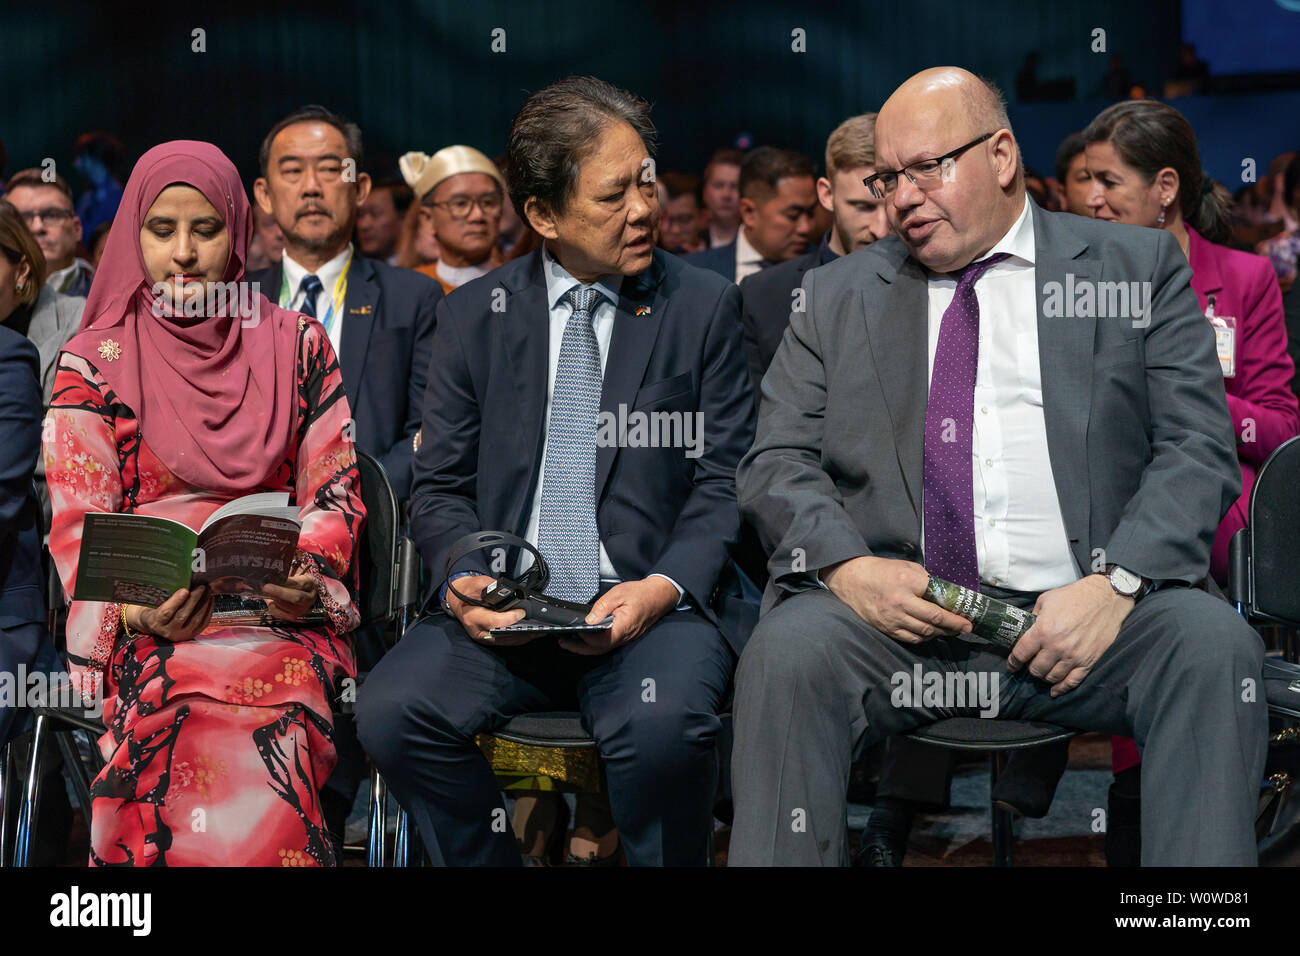 ITB Berlin 2019 - Opening Ceremony. S.E. Datuk Mohamaddin bin Ketapi, Minister für Tourismus, Kunst und Kultur, Malaysia ,Peter Altmaier, Federal Minister for Economic Affairs and Energy (V.l.n.r.) Stock Photo